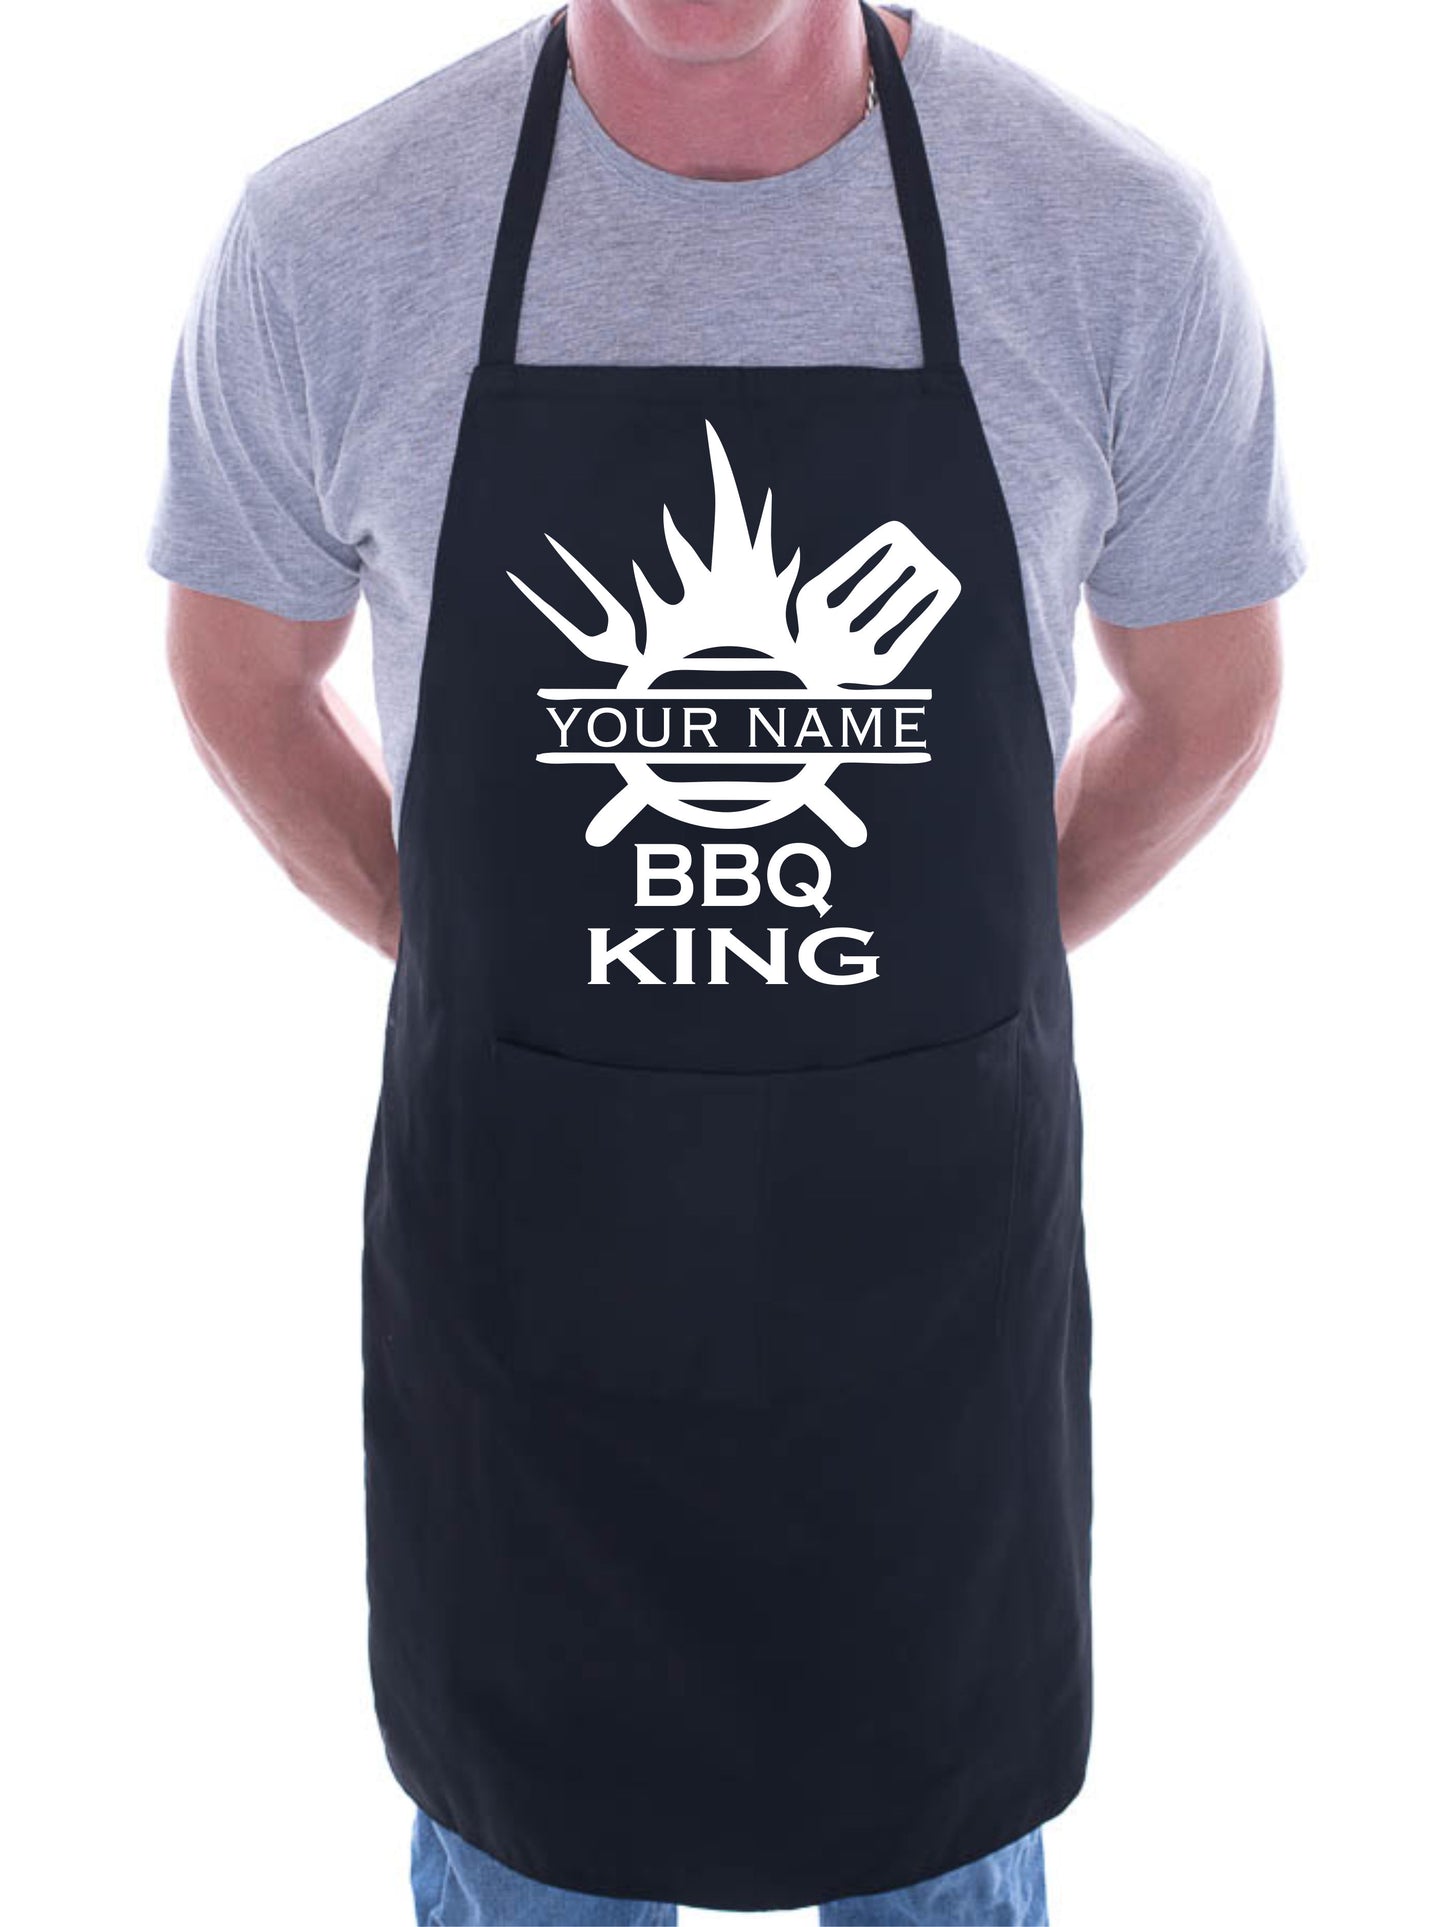 BBQ King Personalise This Apron Add Your Name Here BBQ Baking Cooking